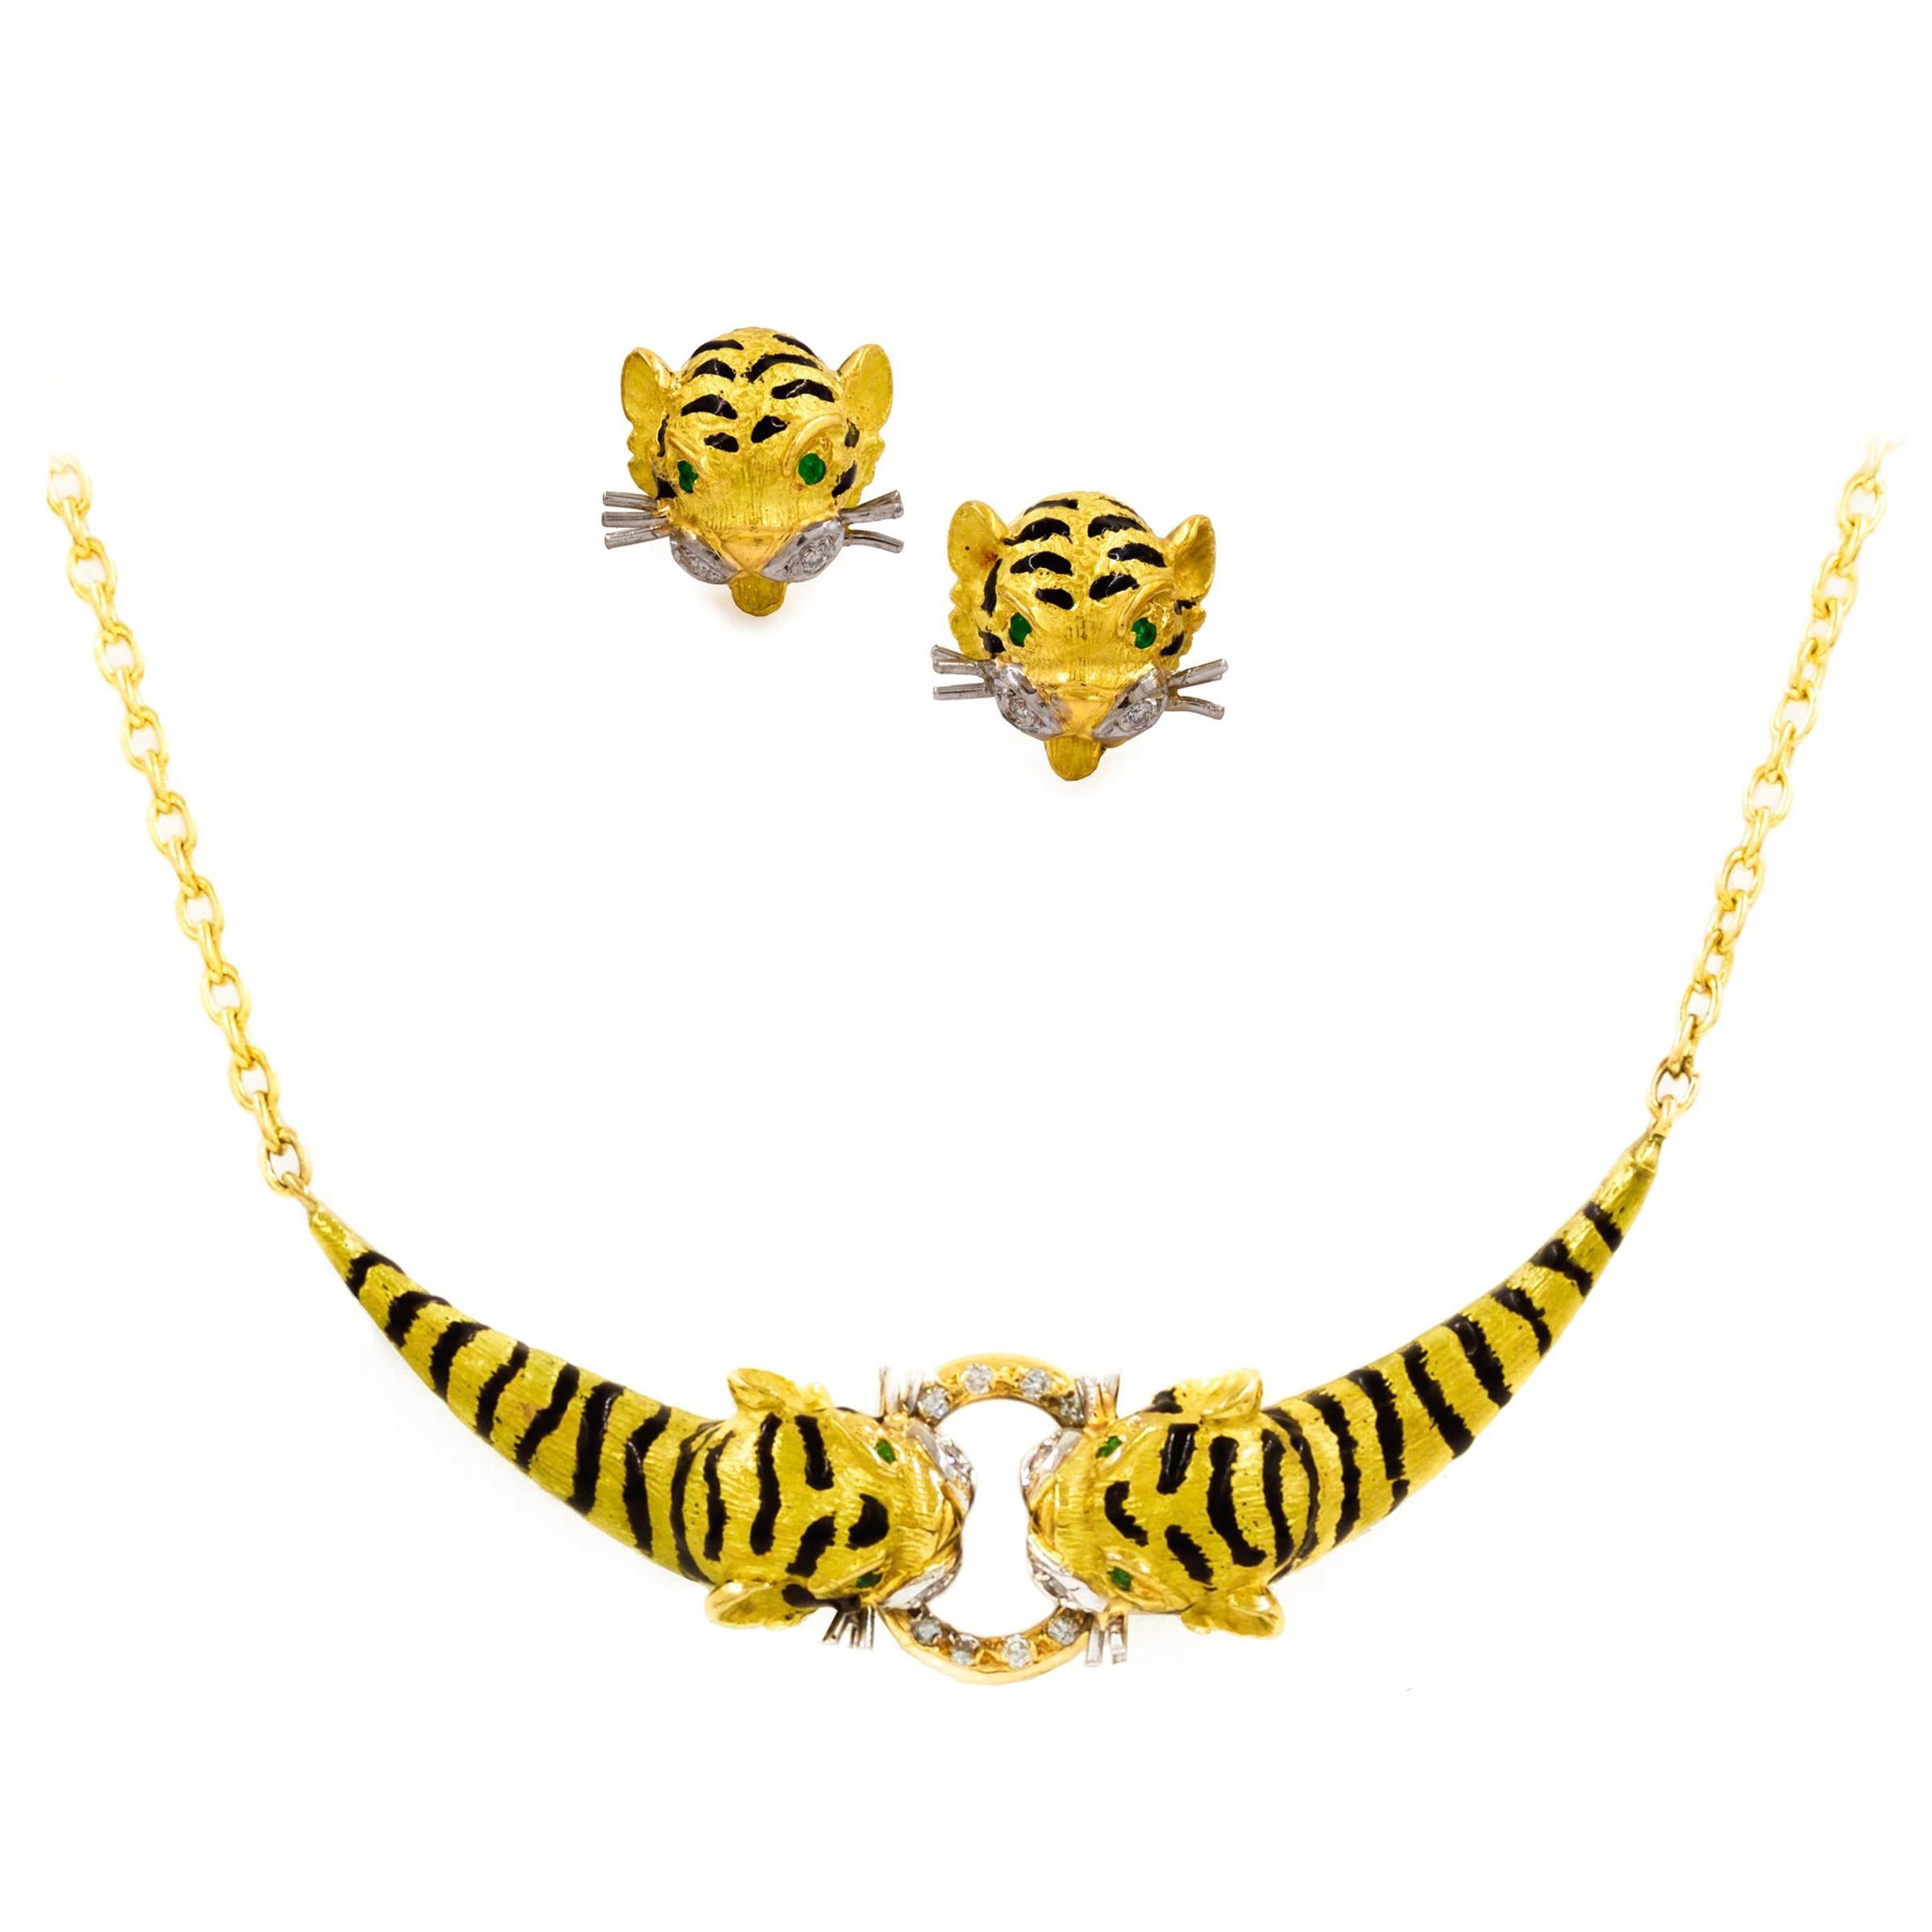 Fine Suite of Enameled 18k Gold "Tiger" Sculptural Necklace and Earrings For Sale